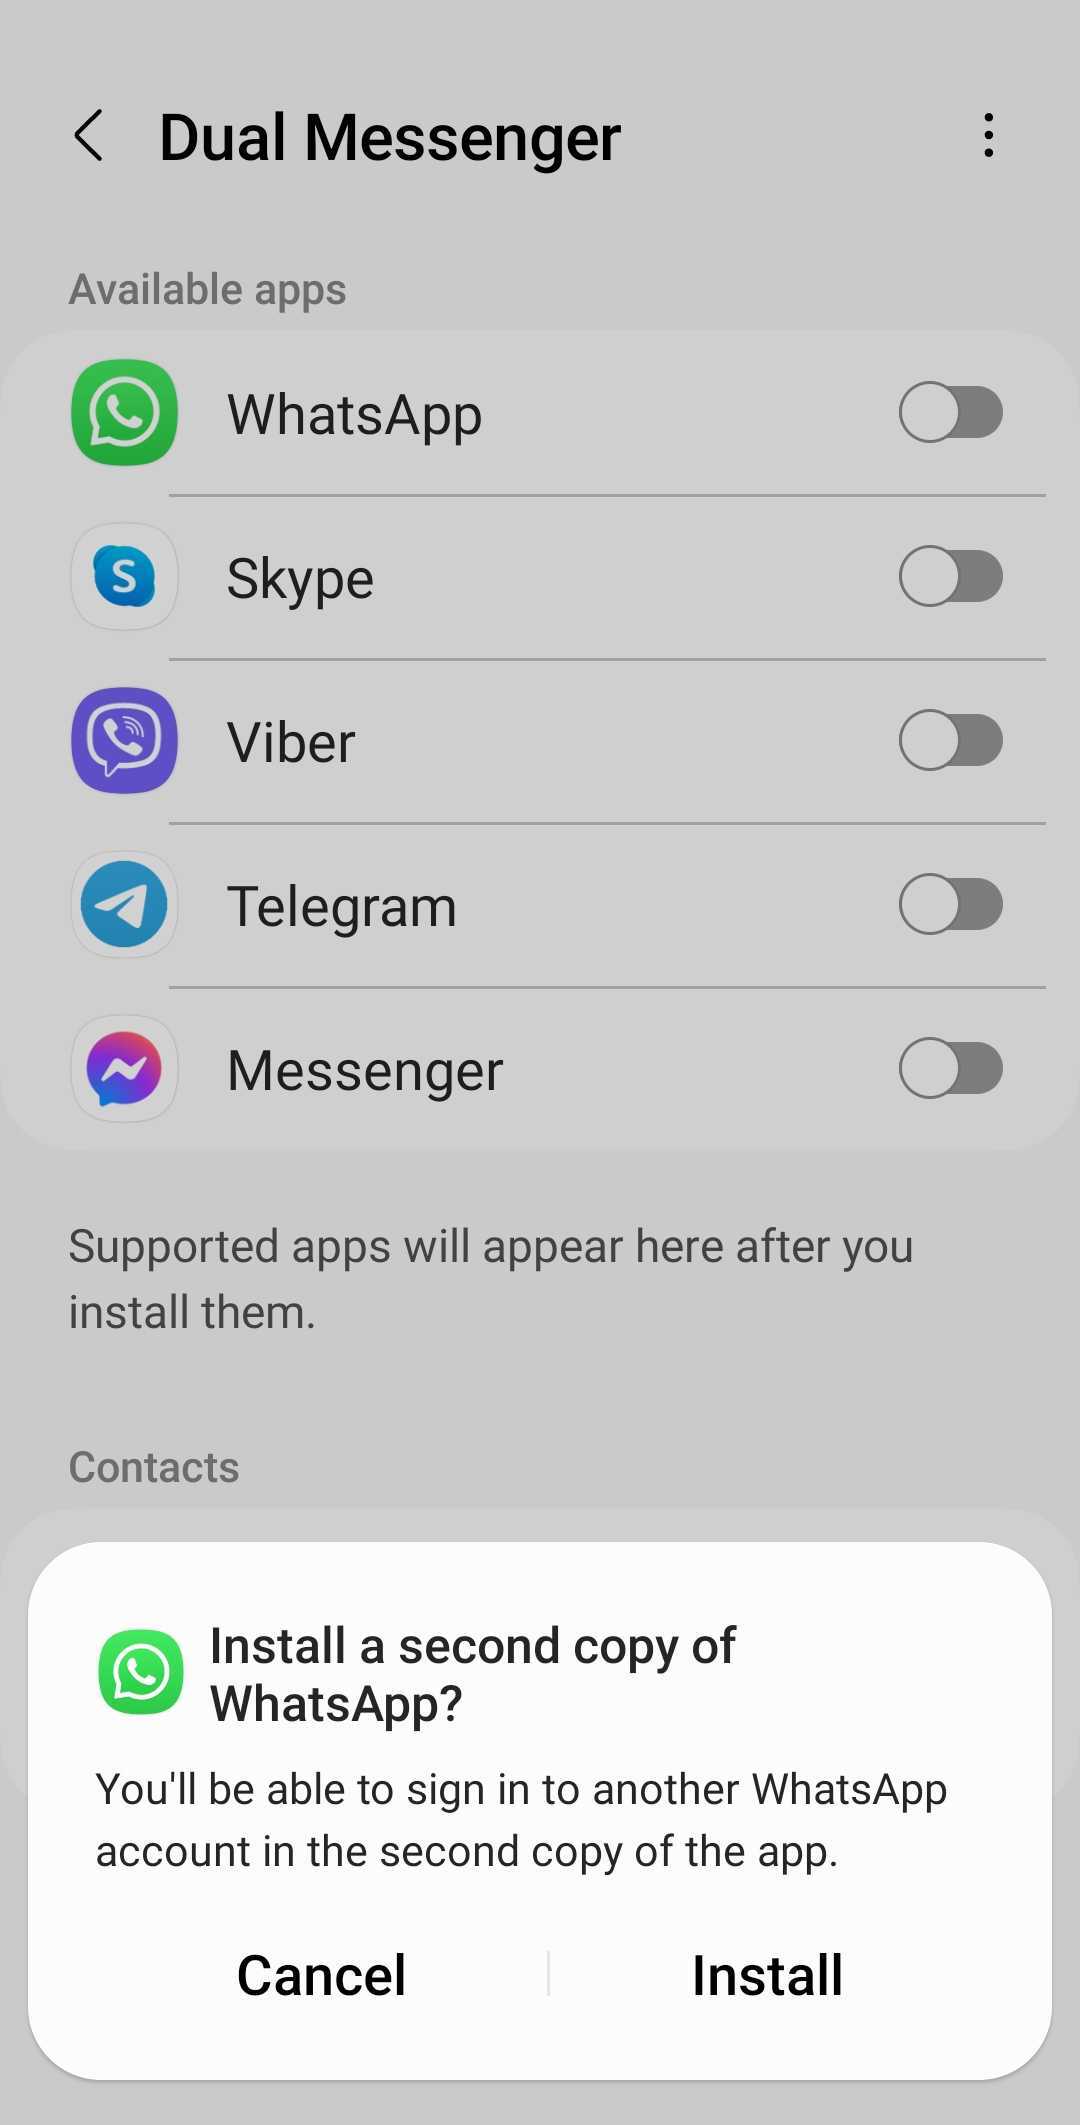 install a second copy of whatsapp